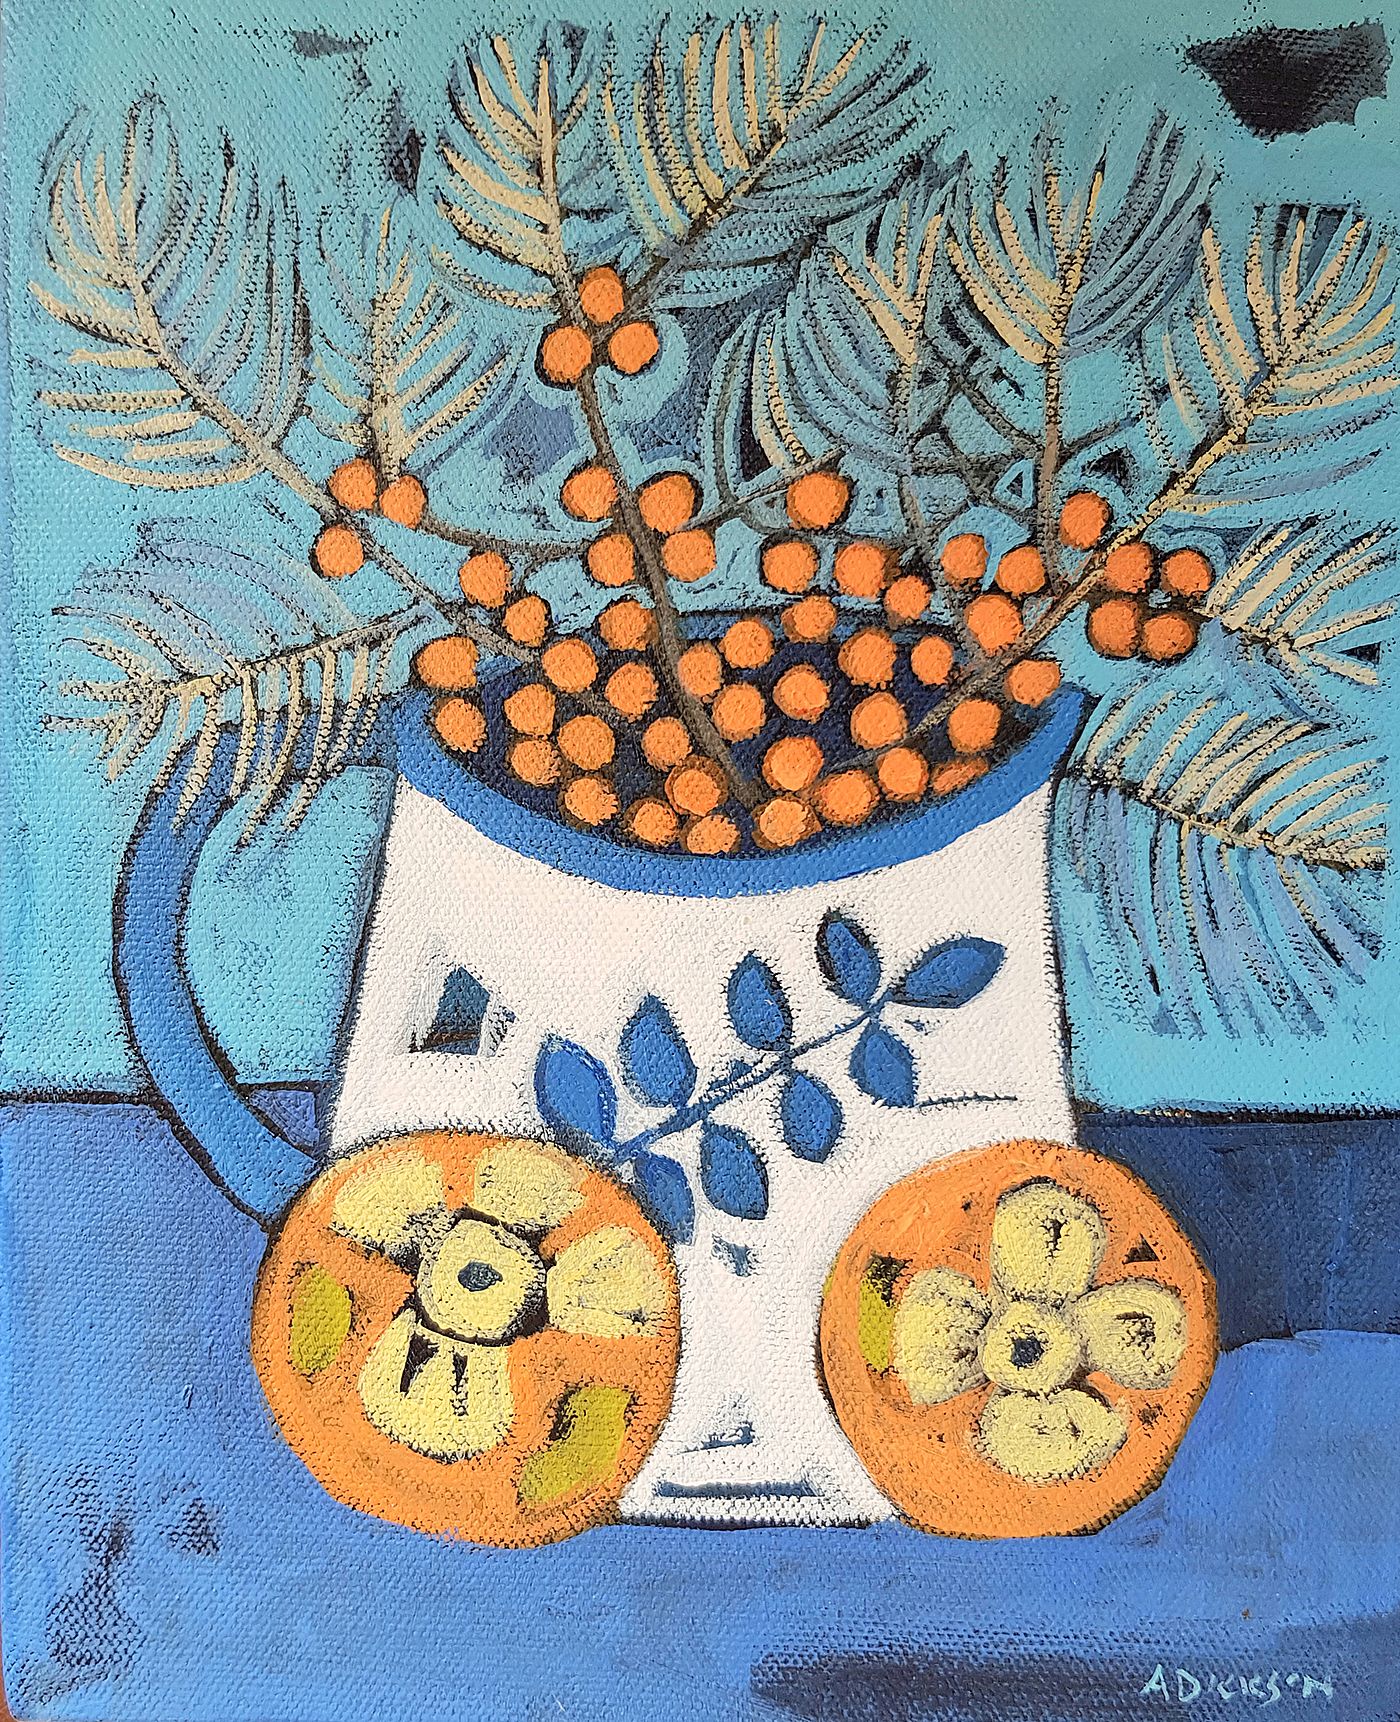 Alison  Dickson - Sea buckthorn and persimmons